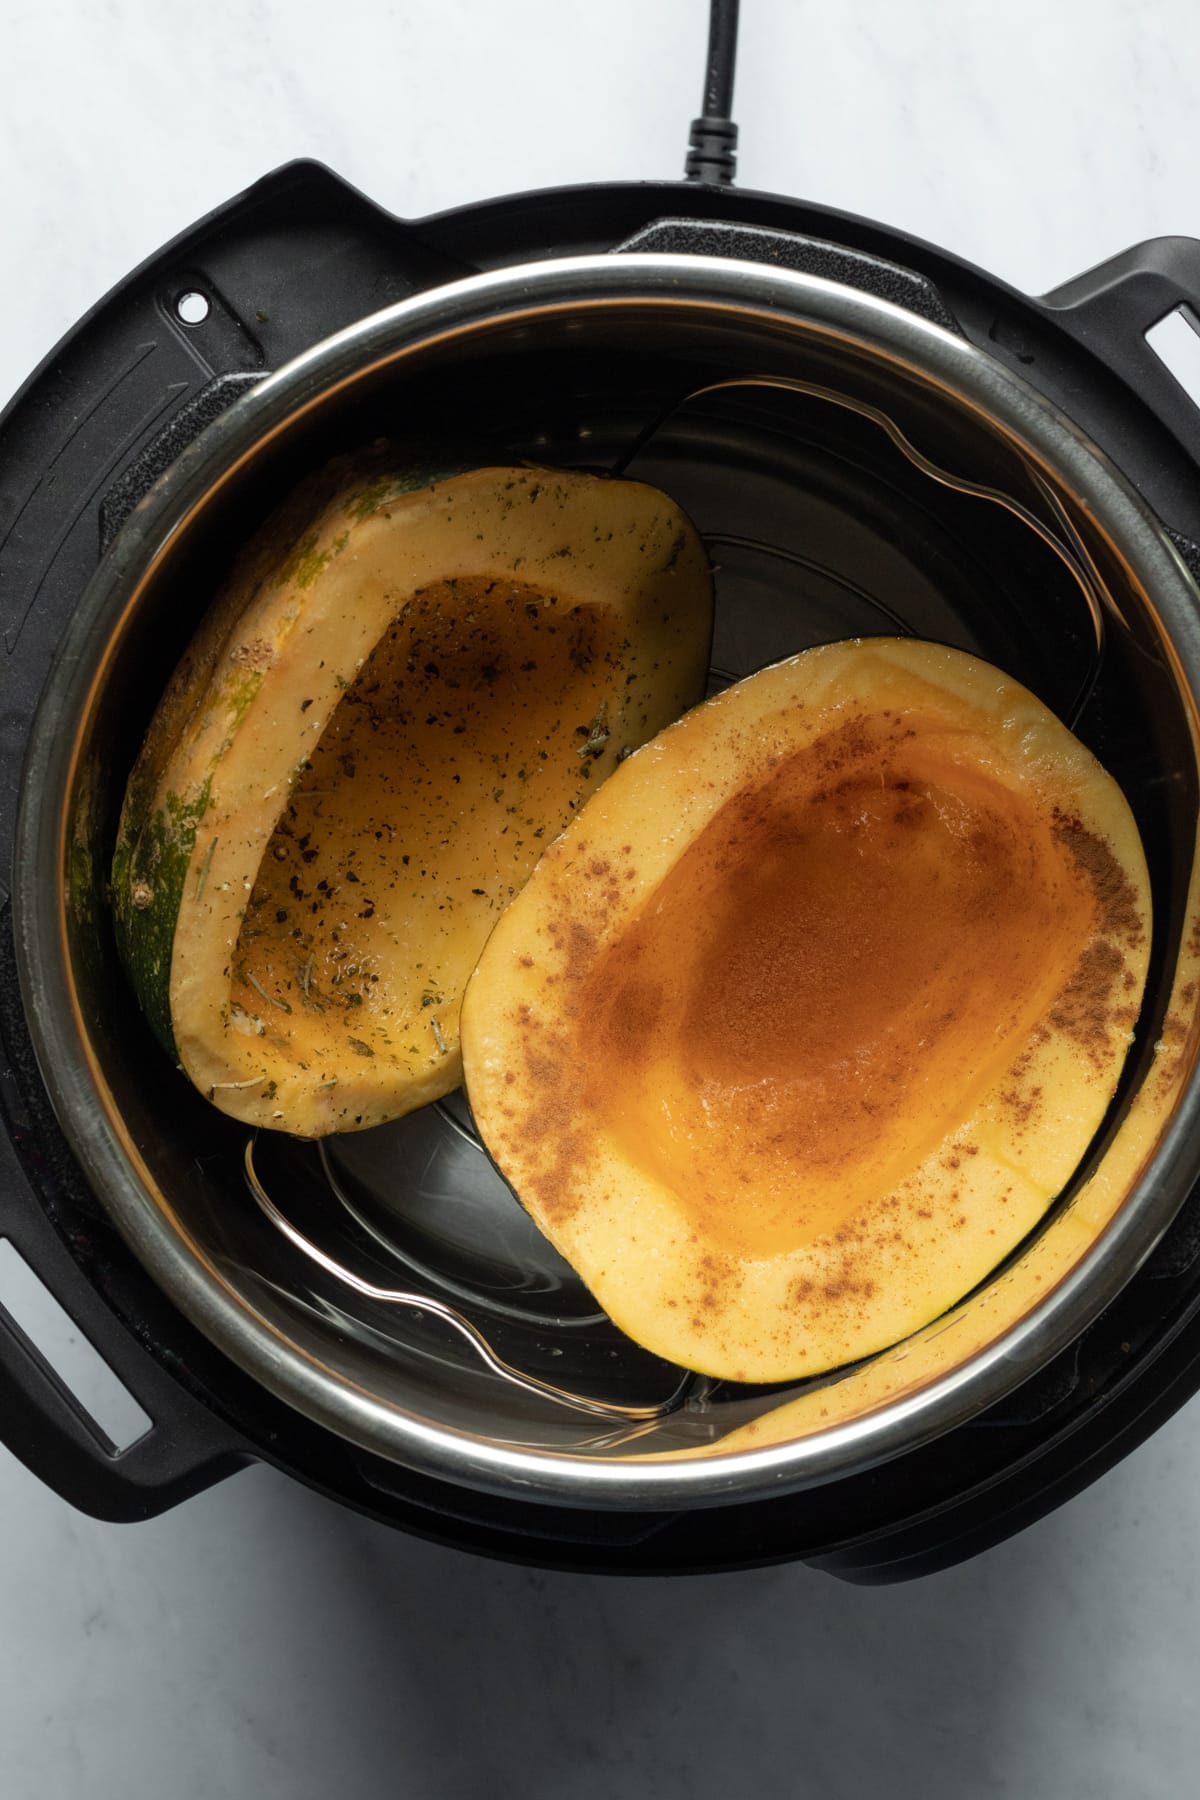 looking into the Instant Pot with two halves of acorn squash.